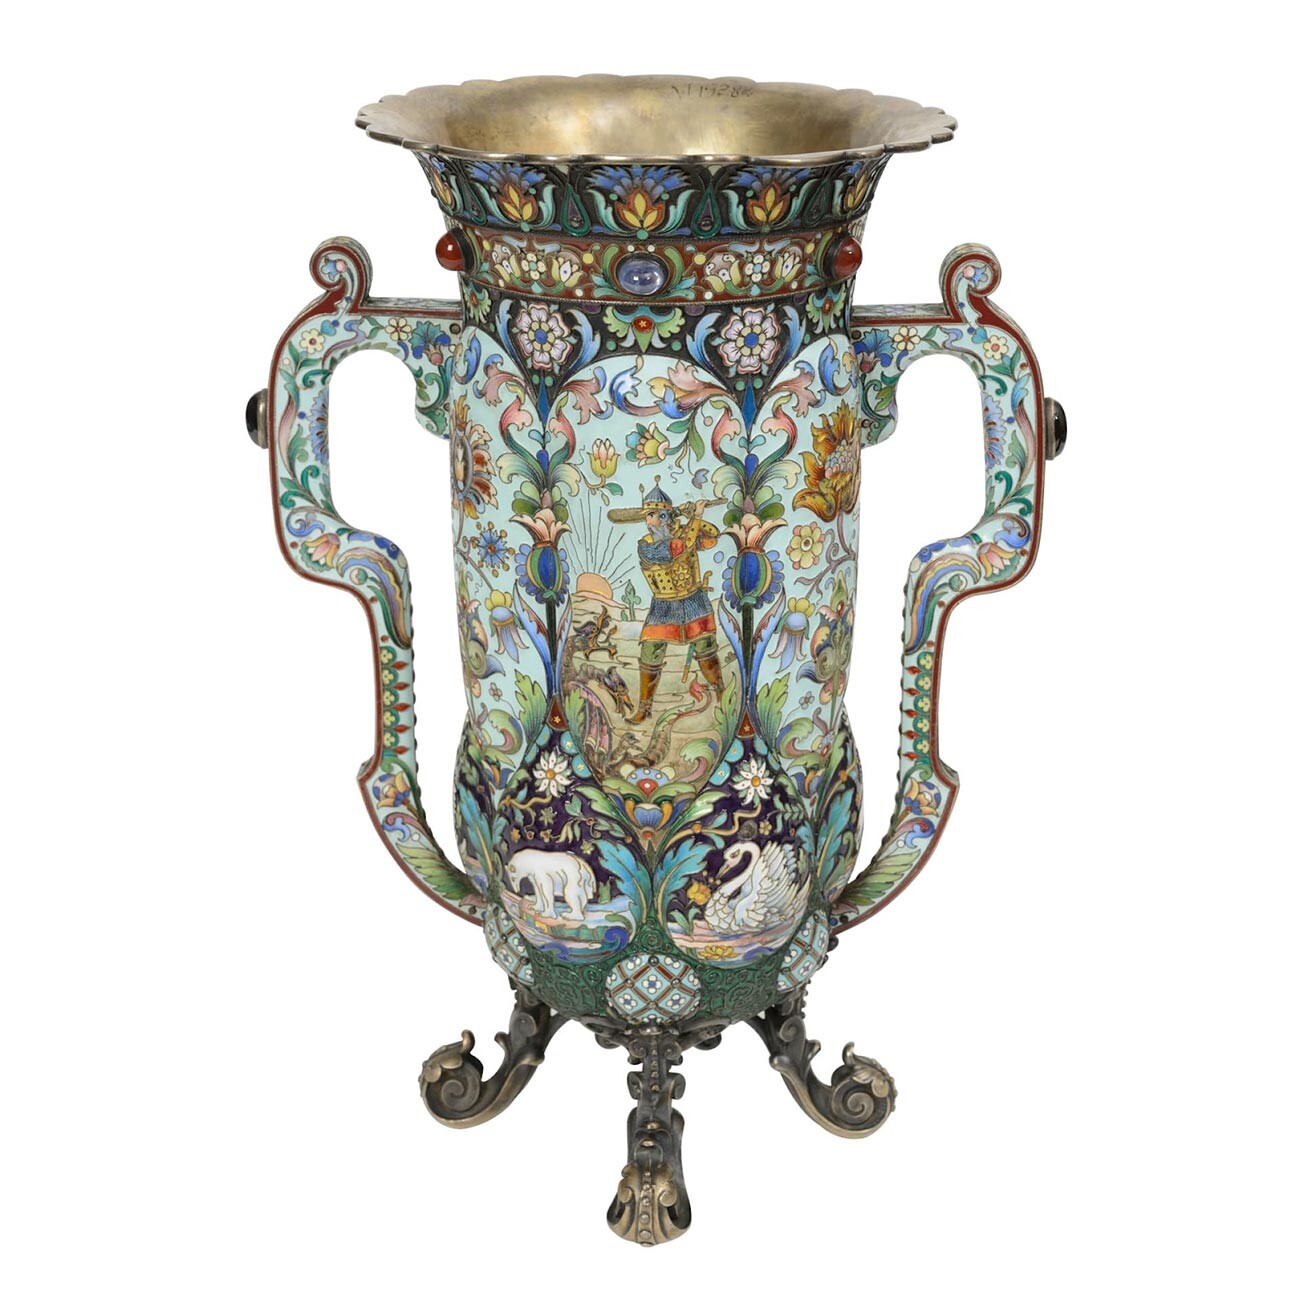 Vase, late 19th–early 20th century